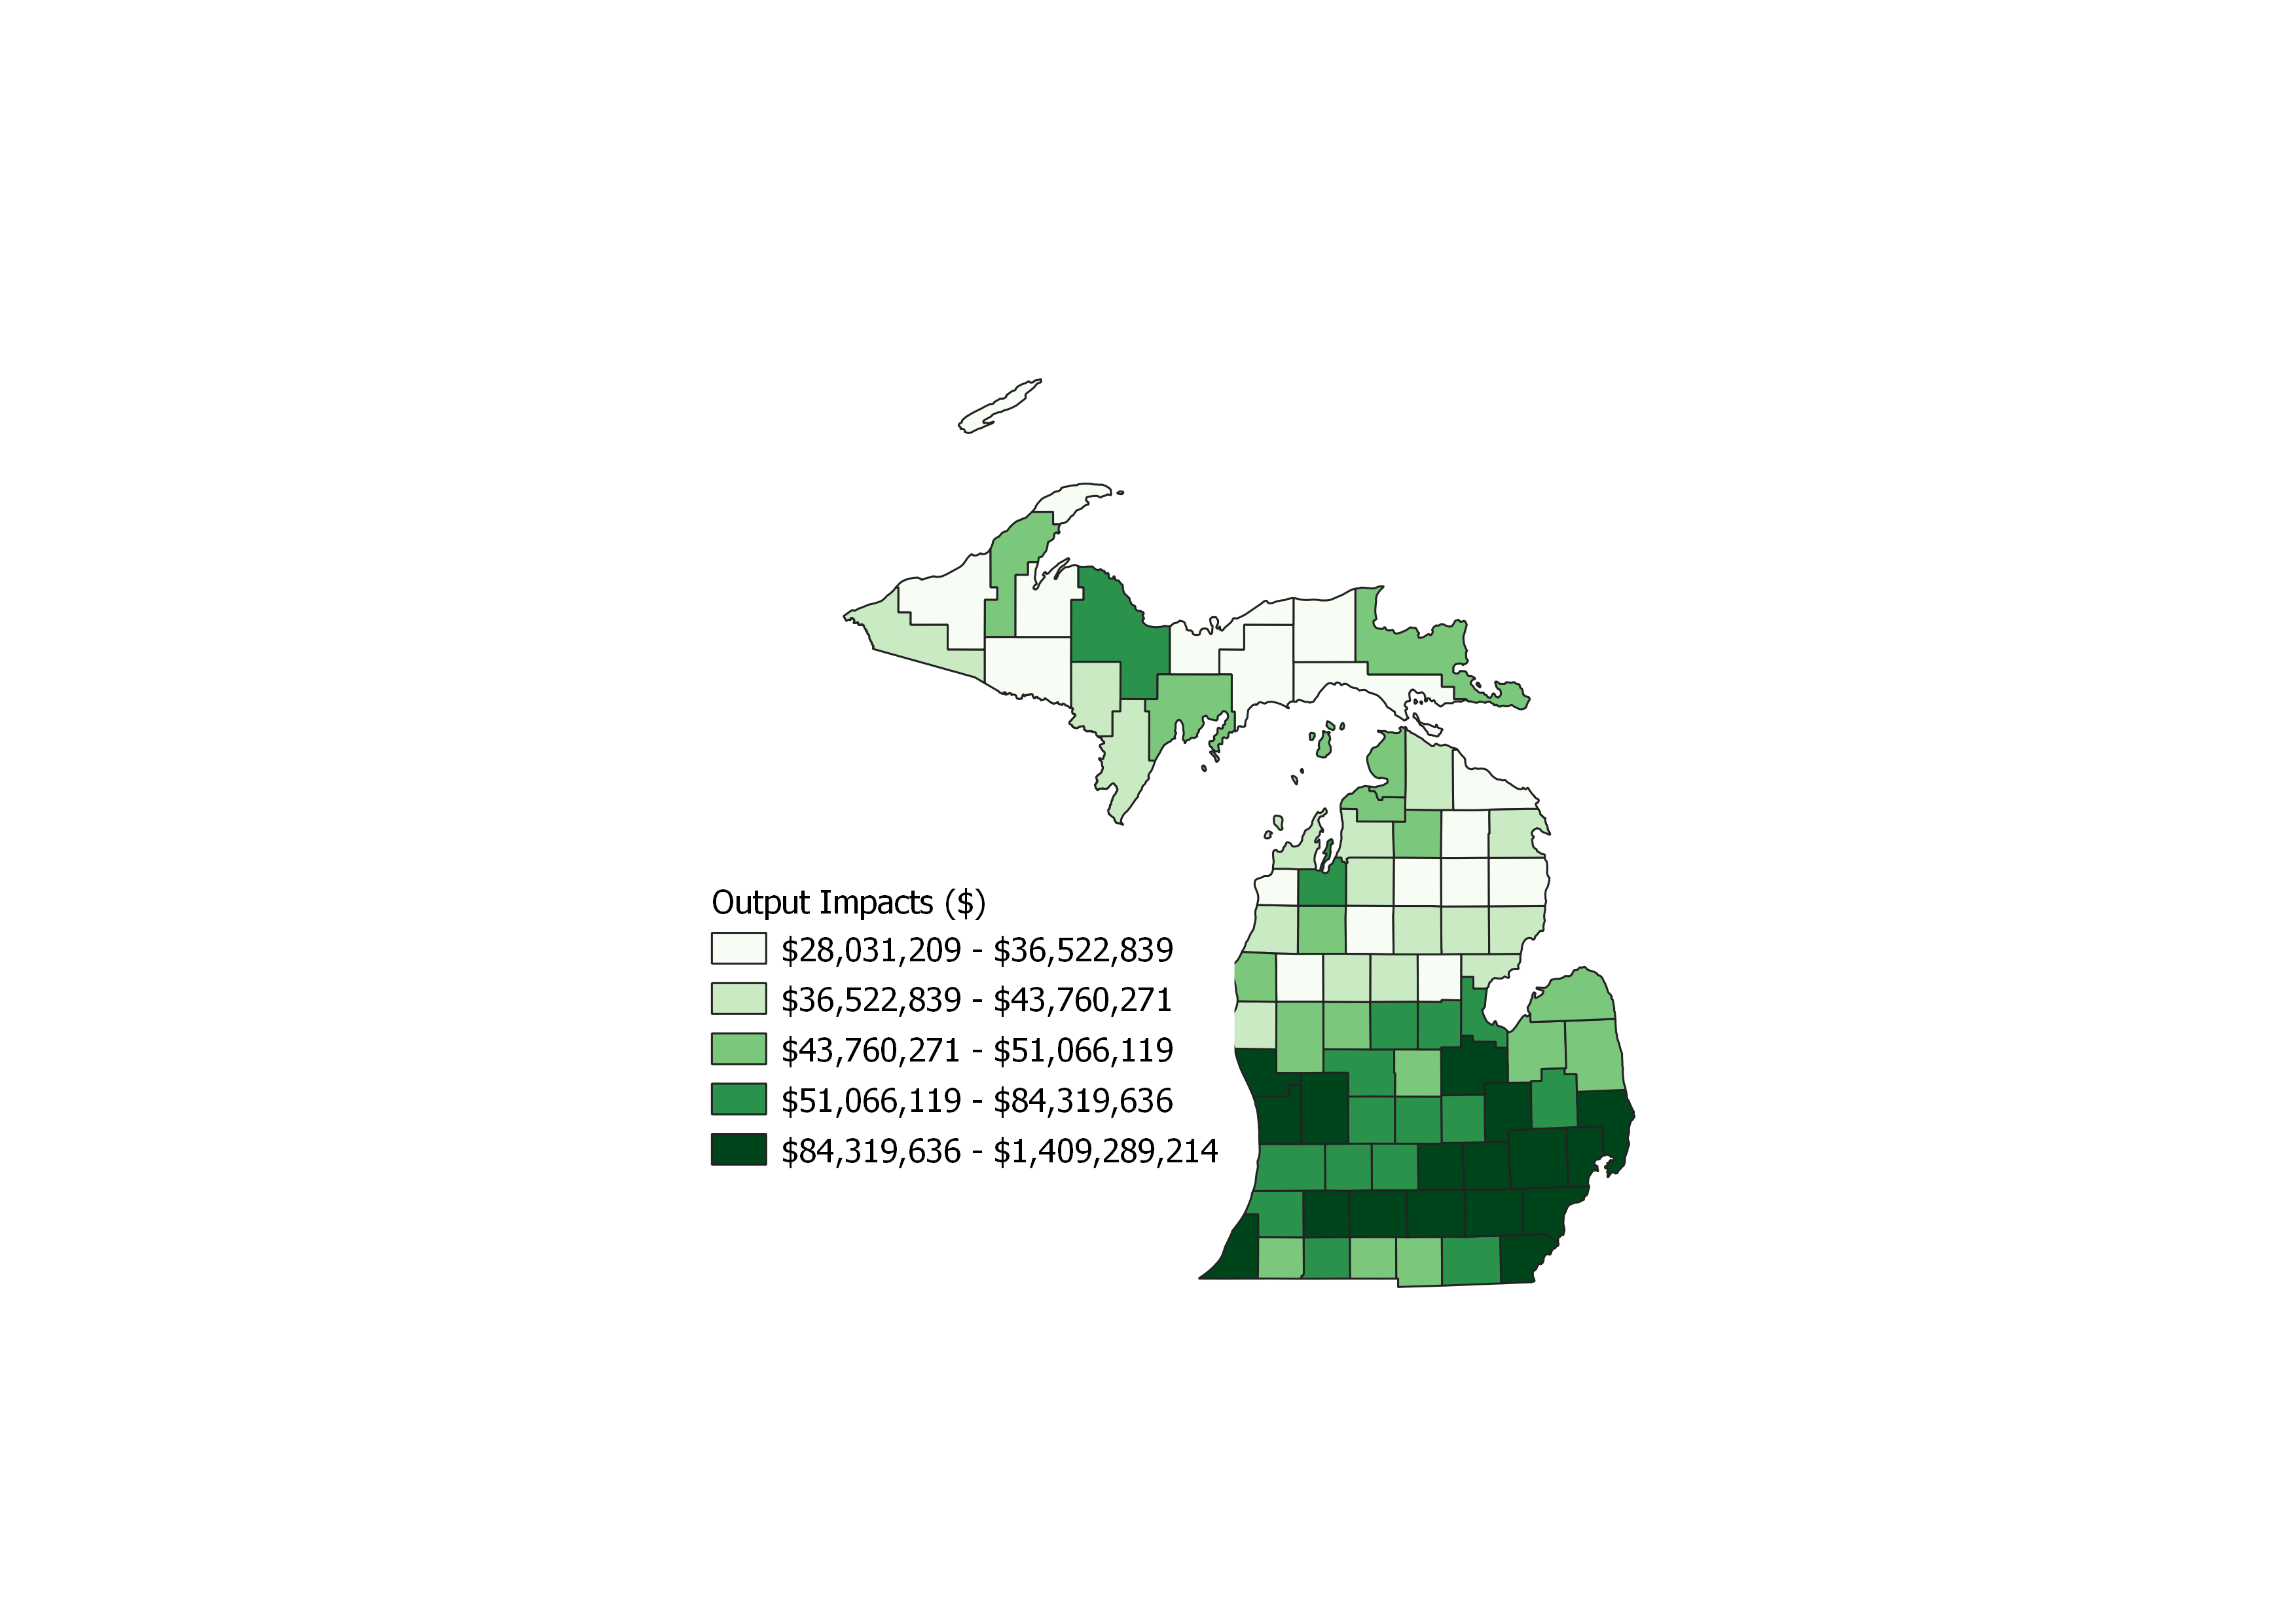 Output Impact by County